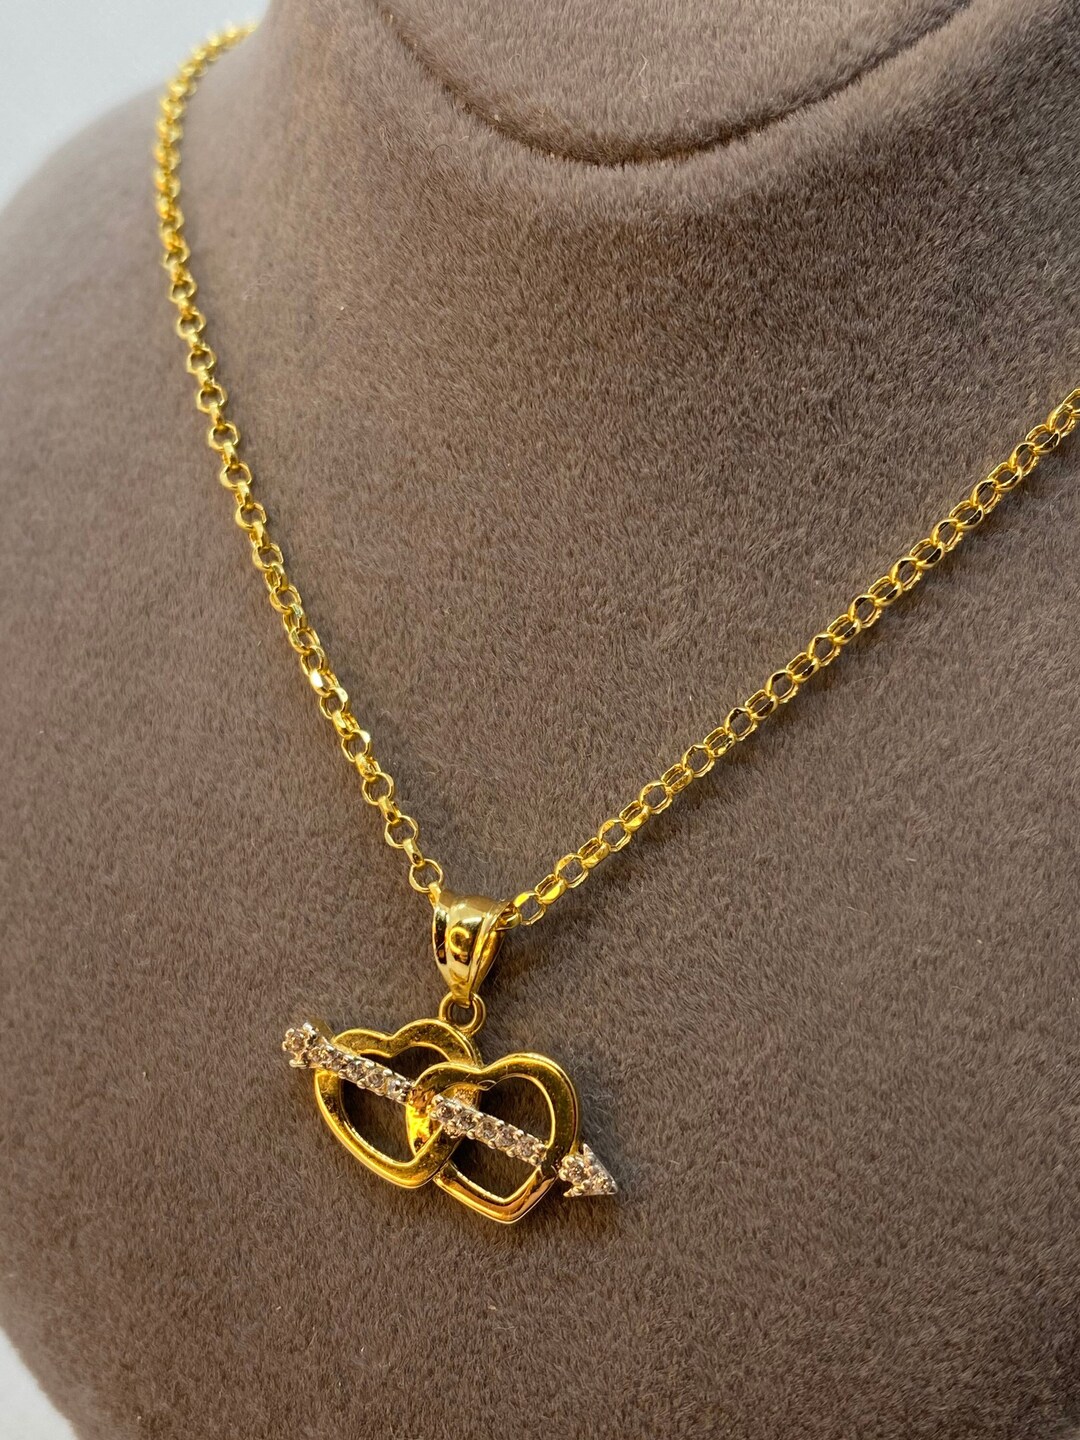 18k Solid Gold Heart Necklace With Arrow 20 Inches 1.5mm - Etsy